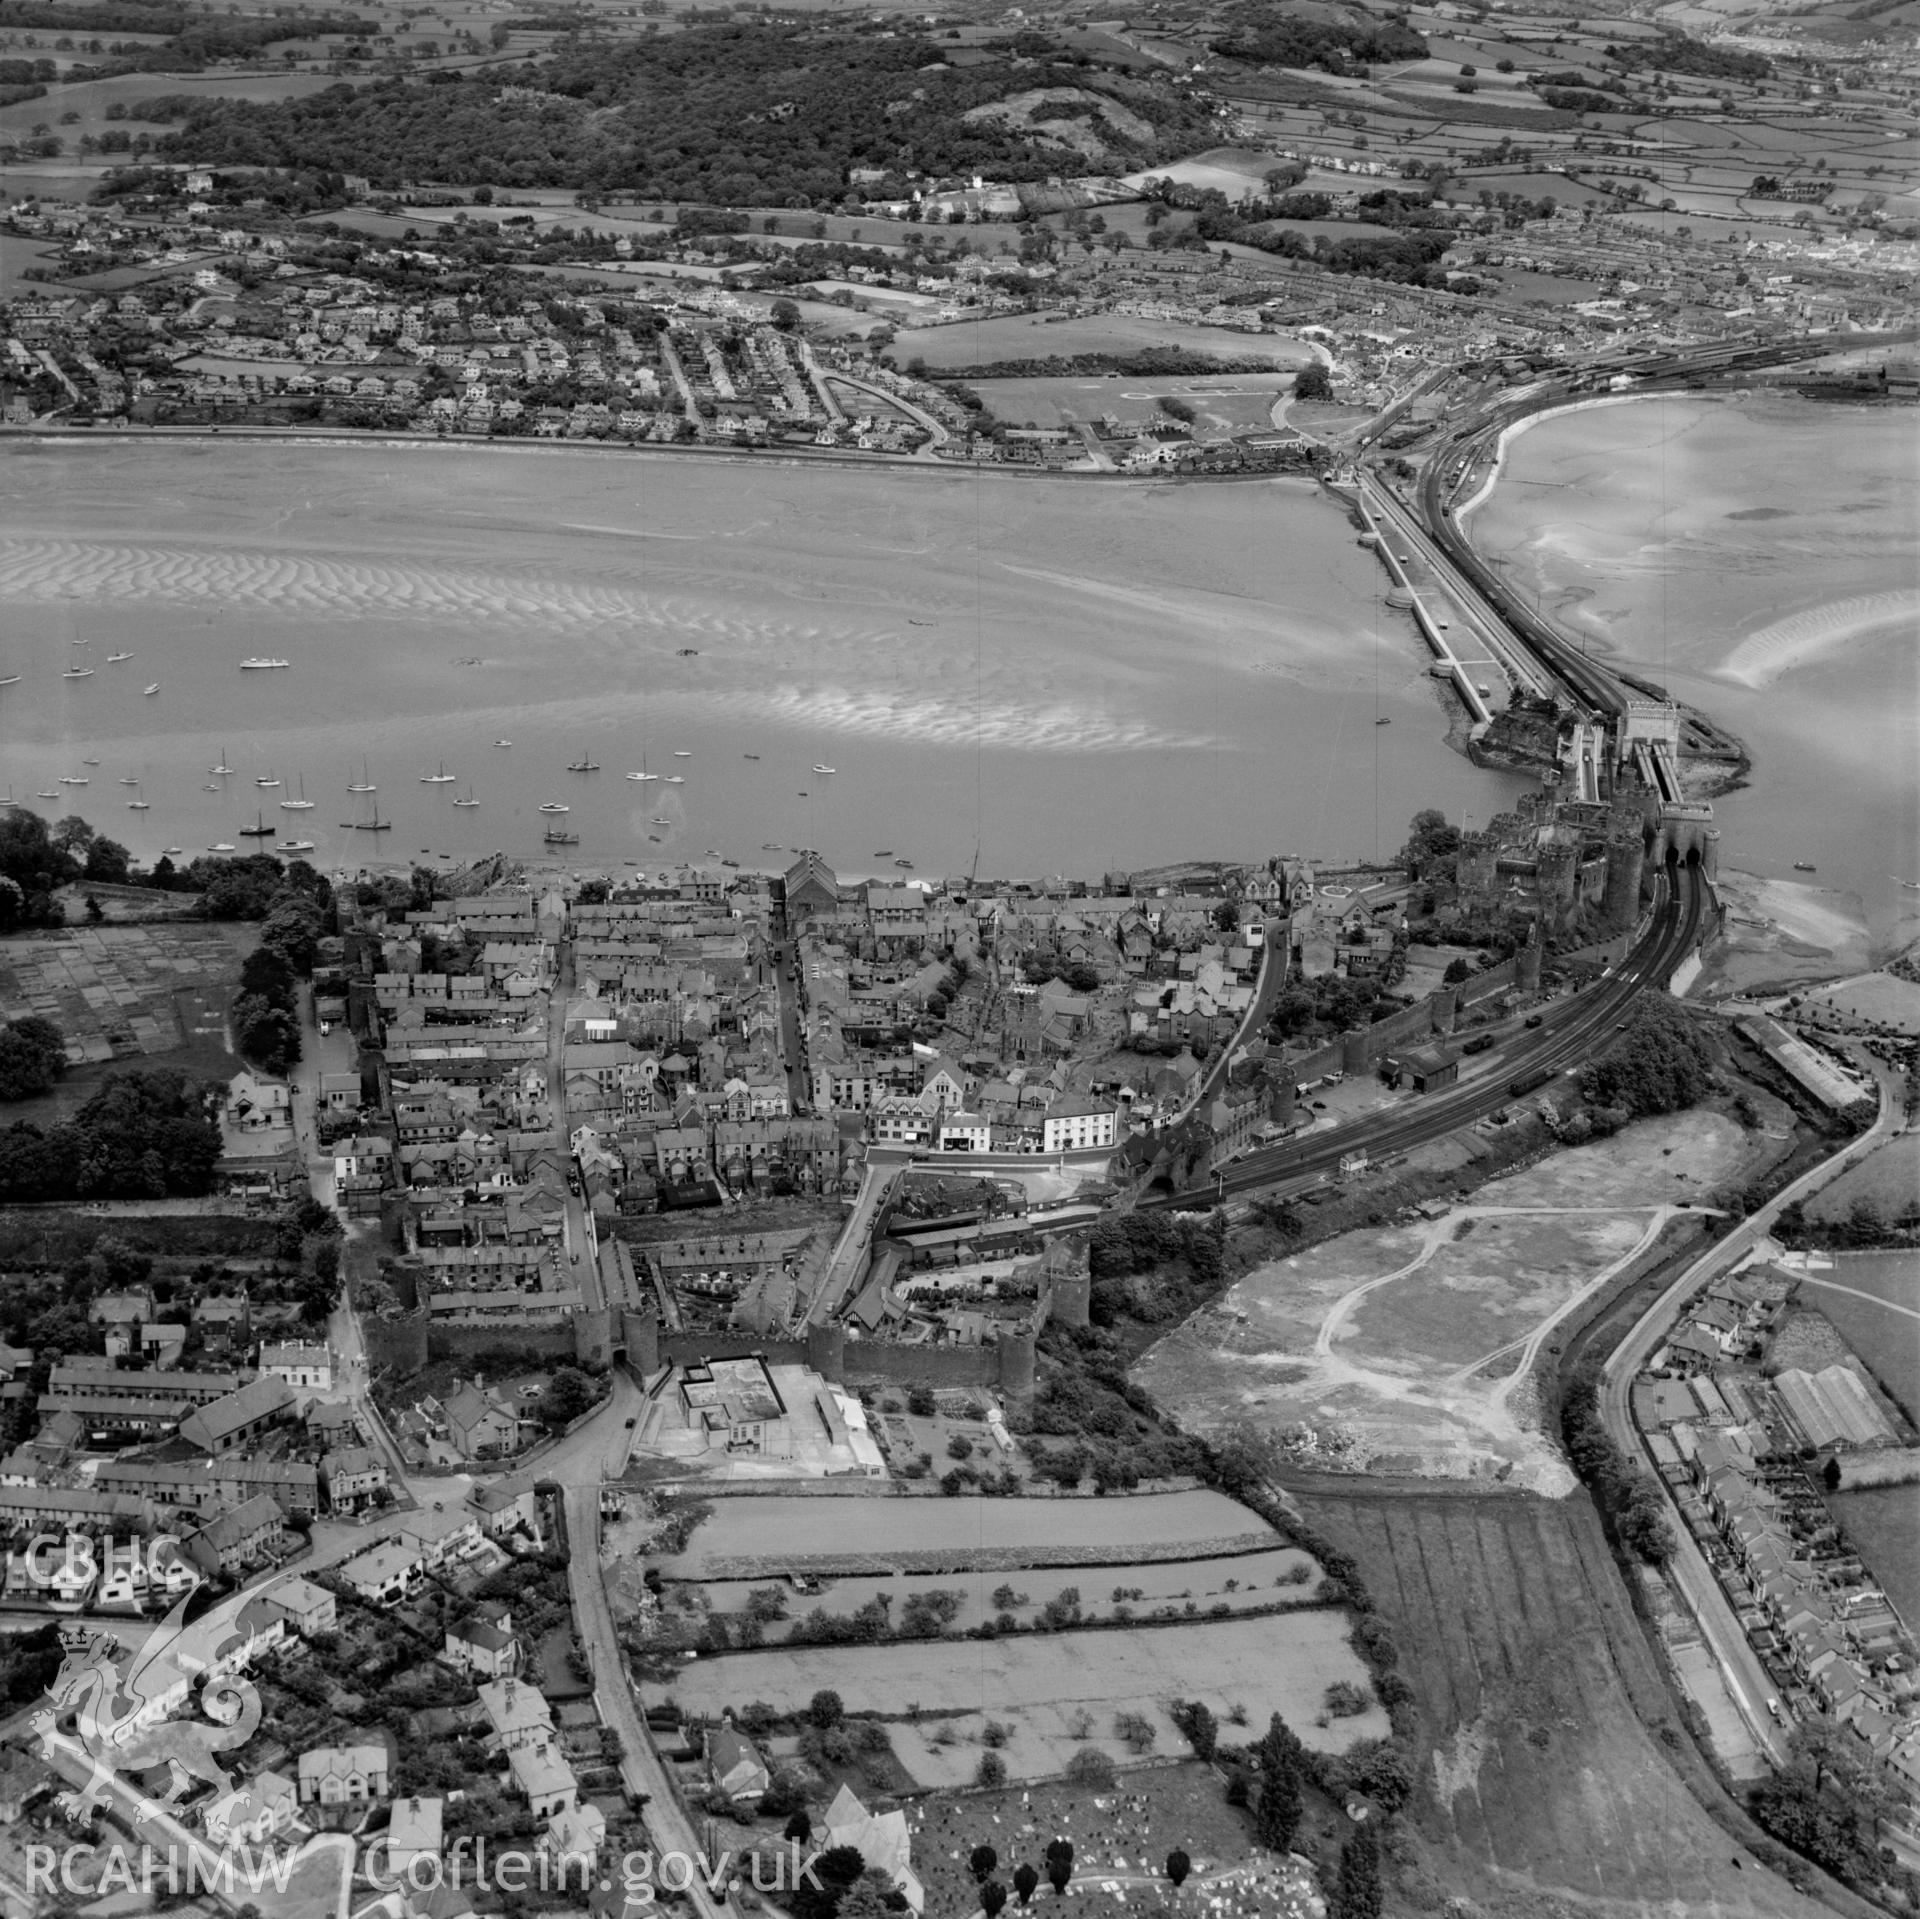 General view of Conwy showing bridges and Llandudno Junction in distance